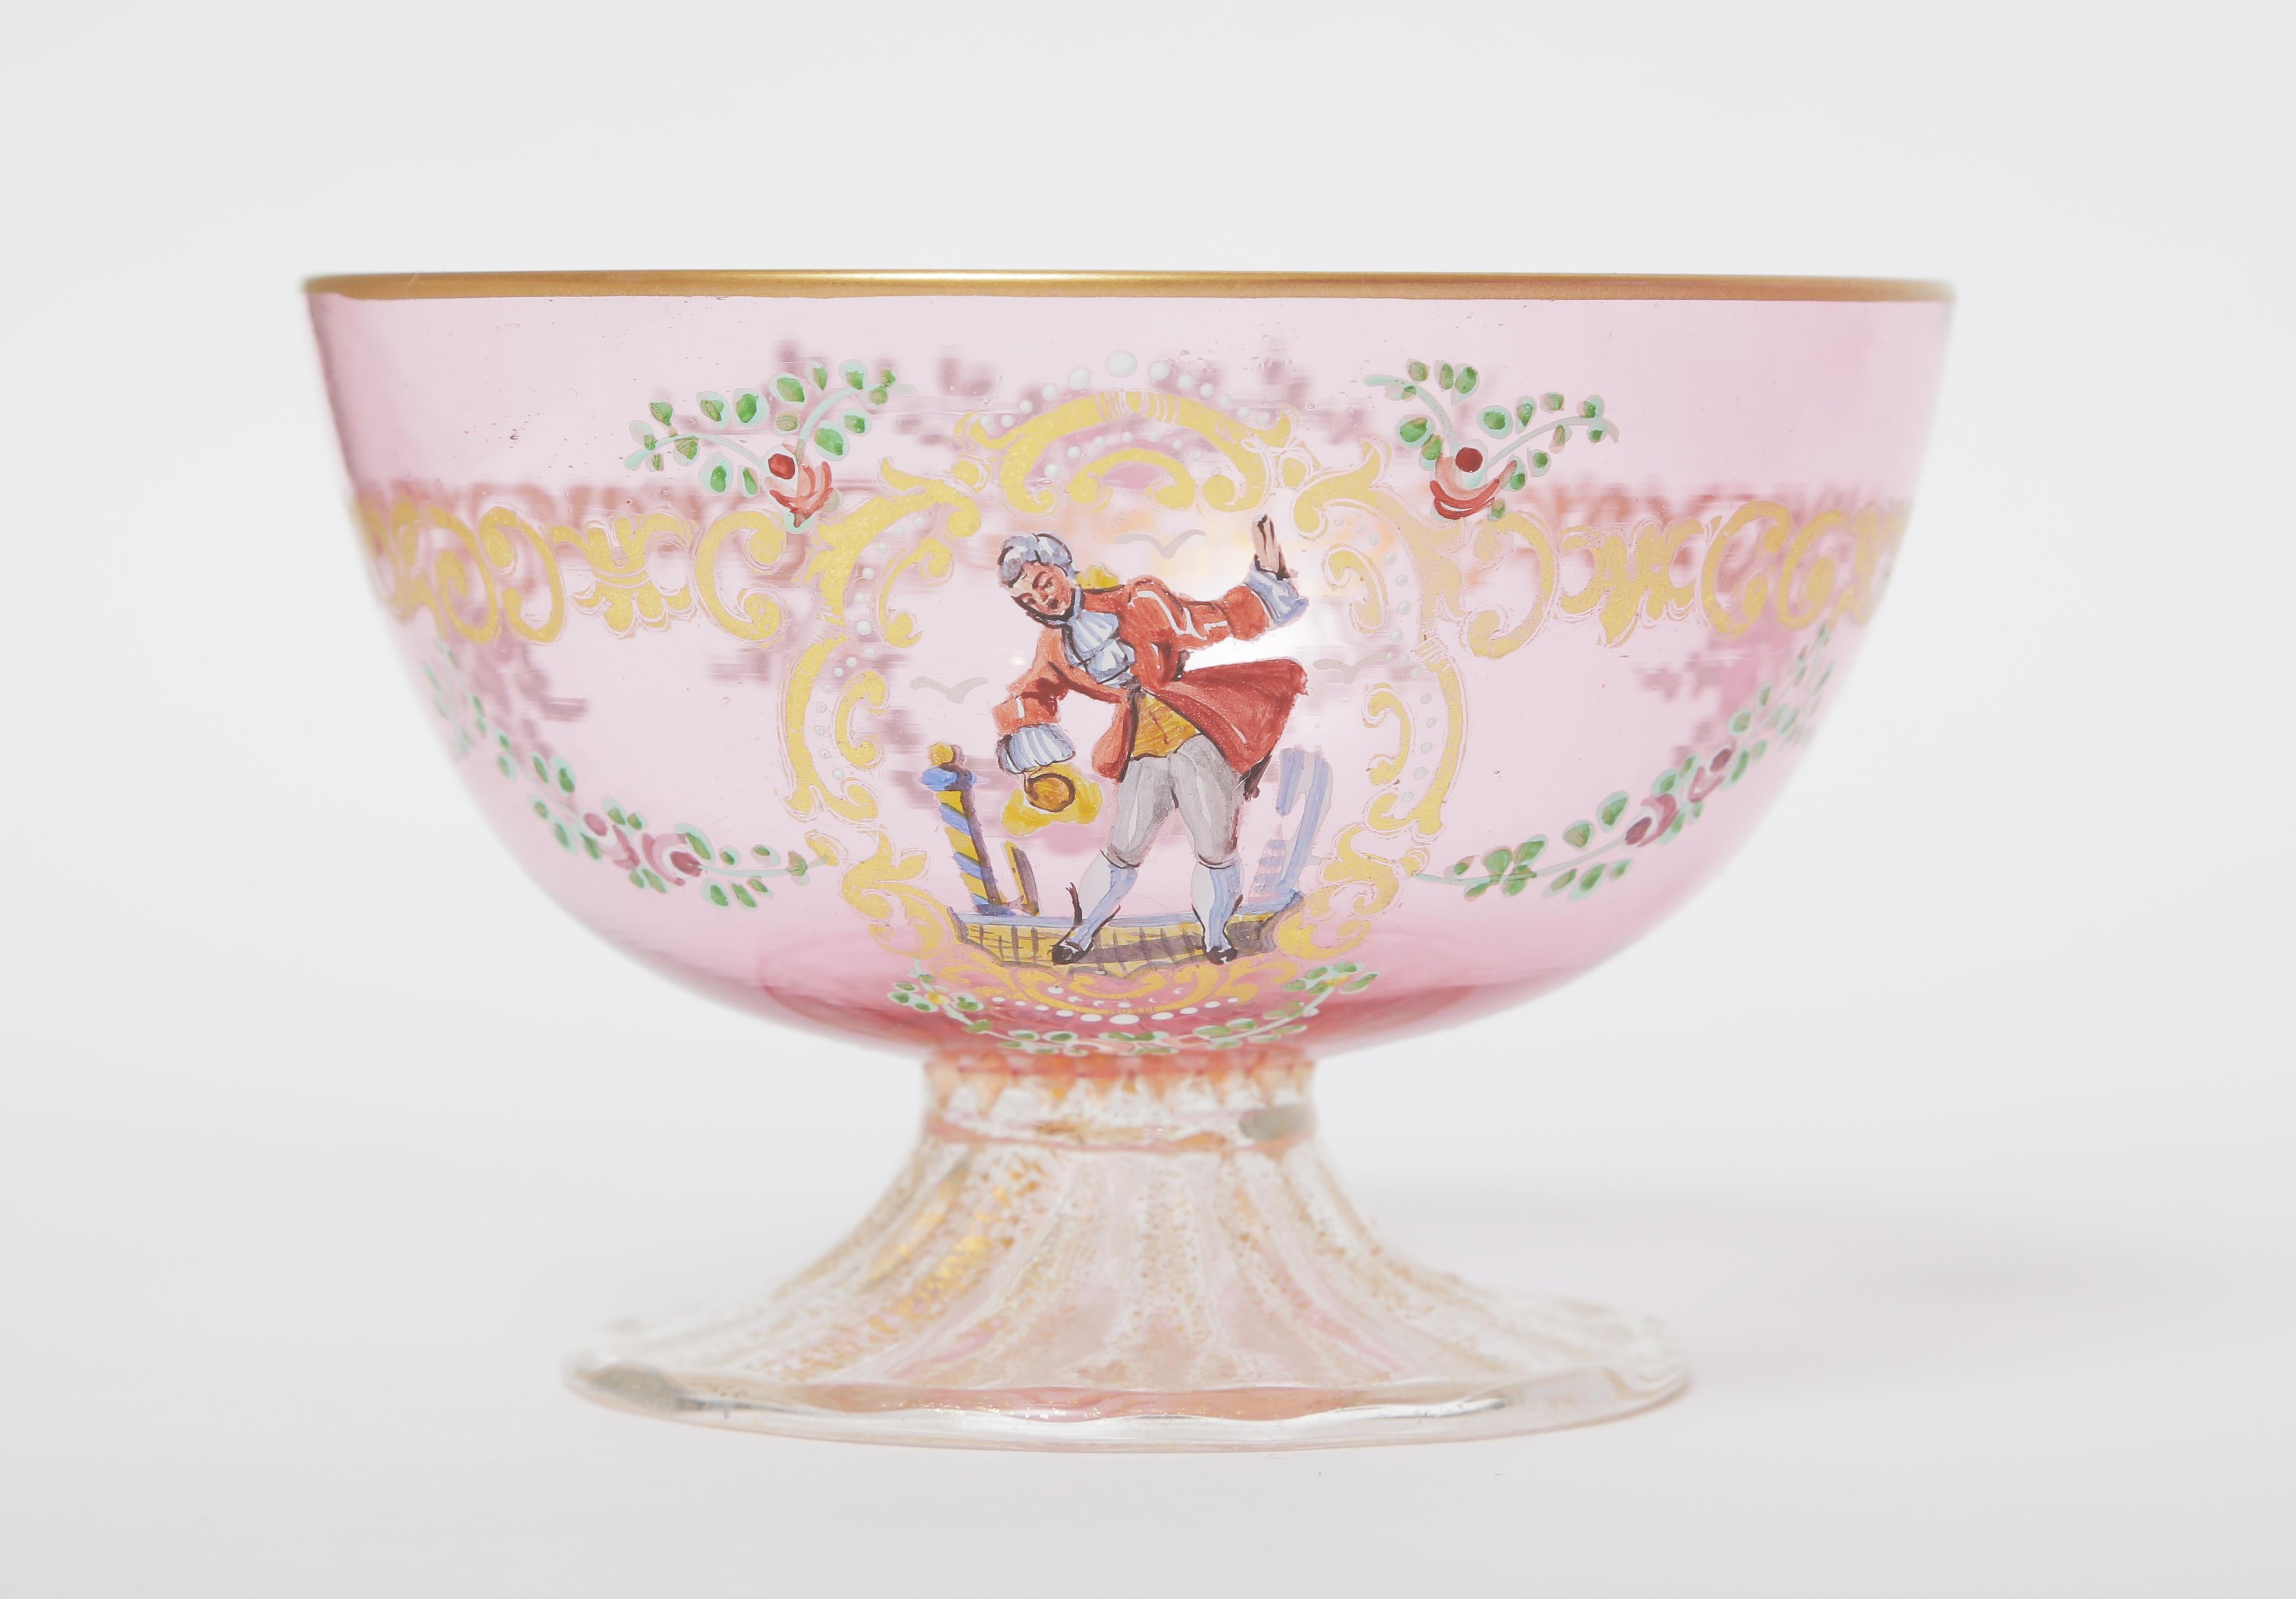 Hand-Crafted 22 Pieces Antique Venetian Glass Dessert Coupes and Plates, Pink, circa 1900